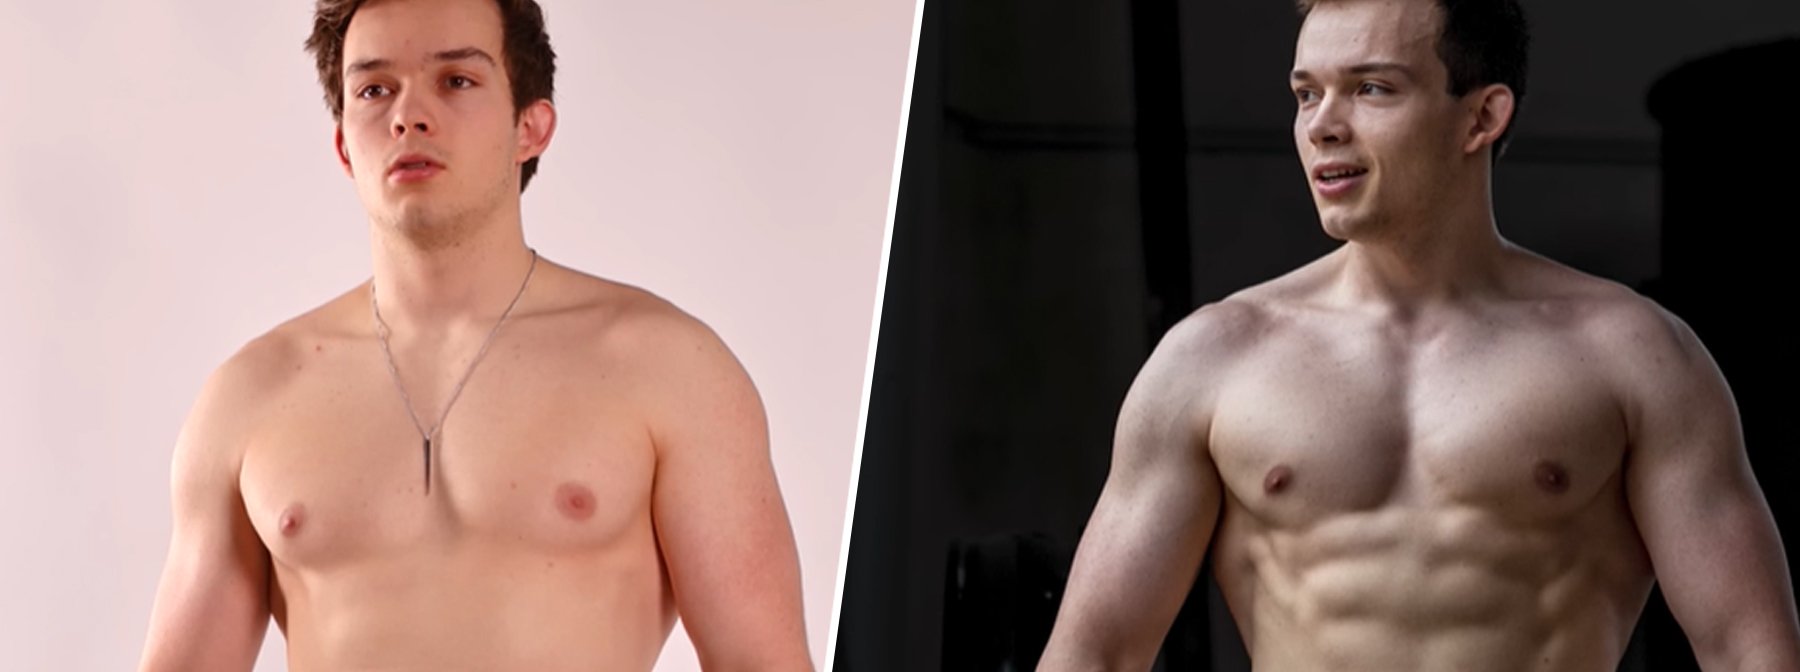 Canadian influencer gets real in body transformation post: 'Change